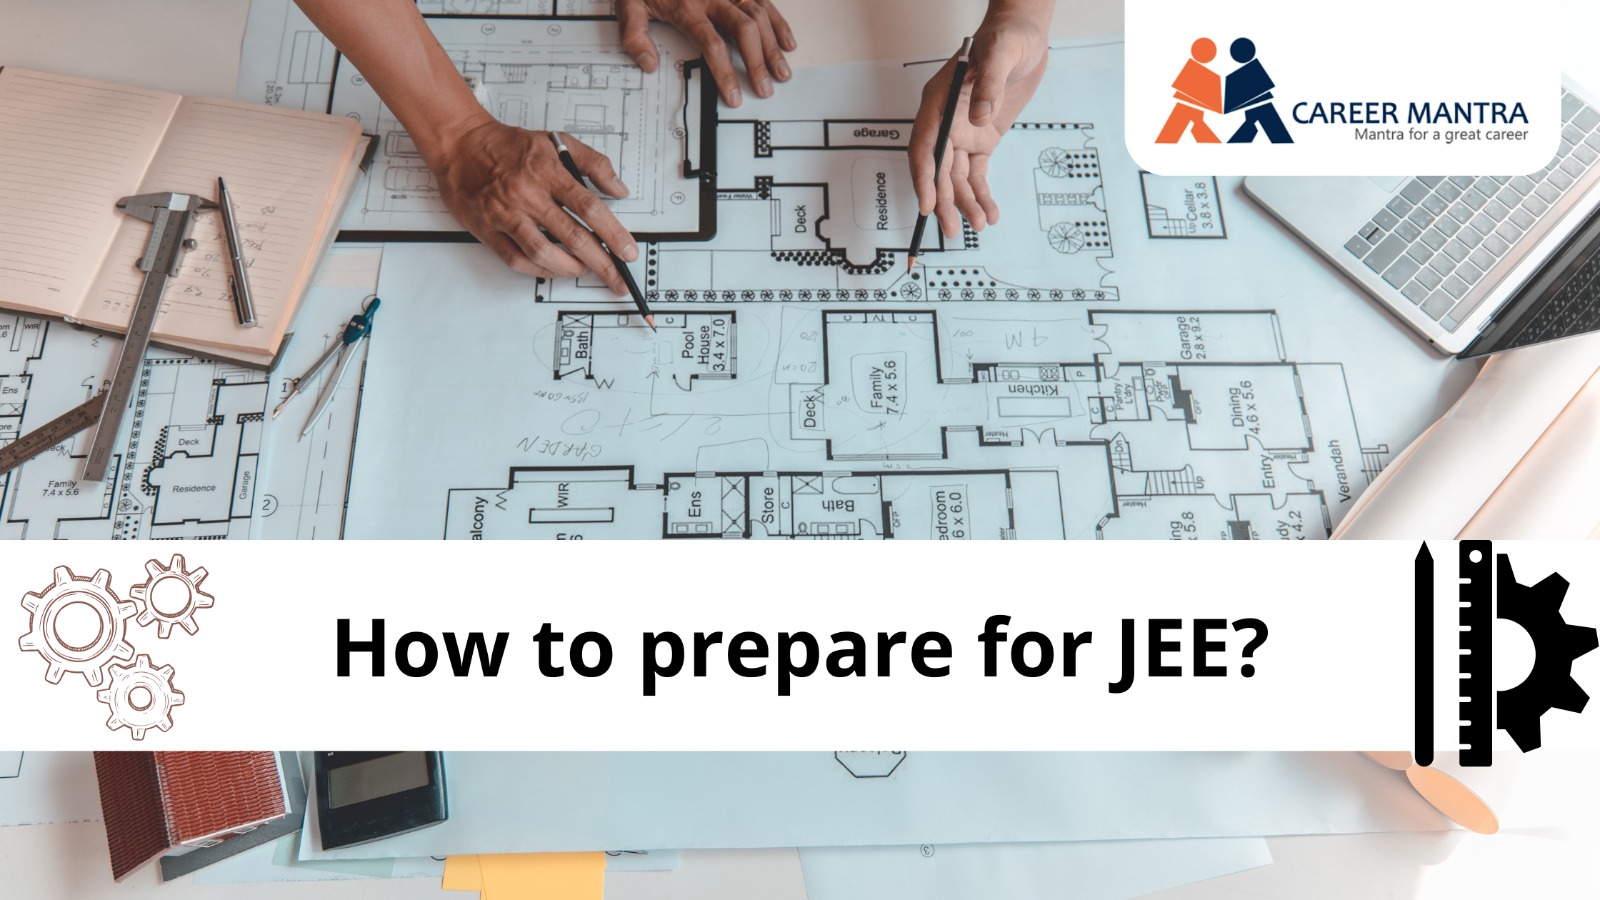 https://www.careermantra.net/blog/how-to-prepare-for-jee/